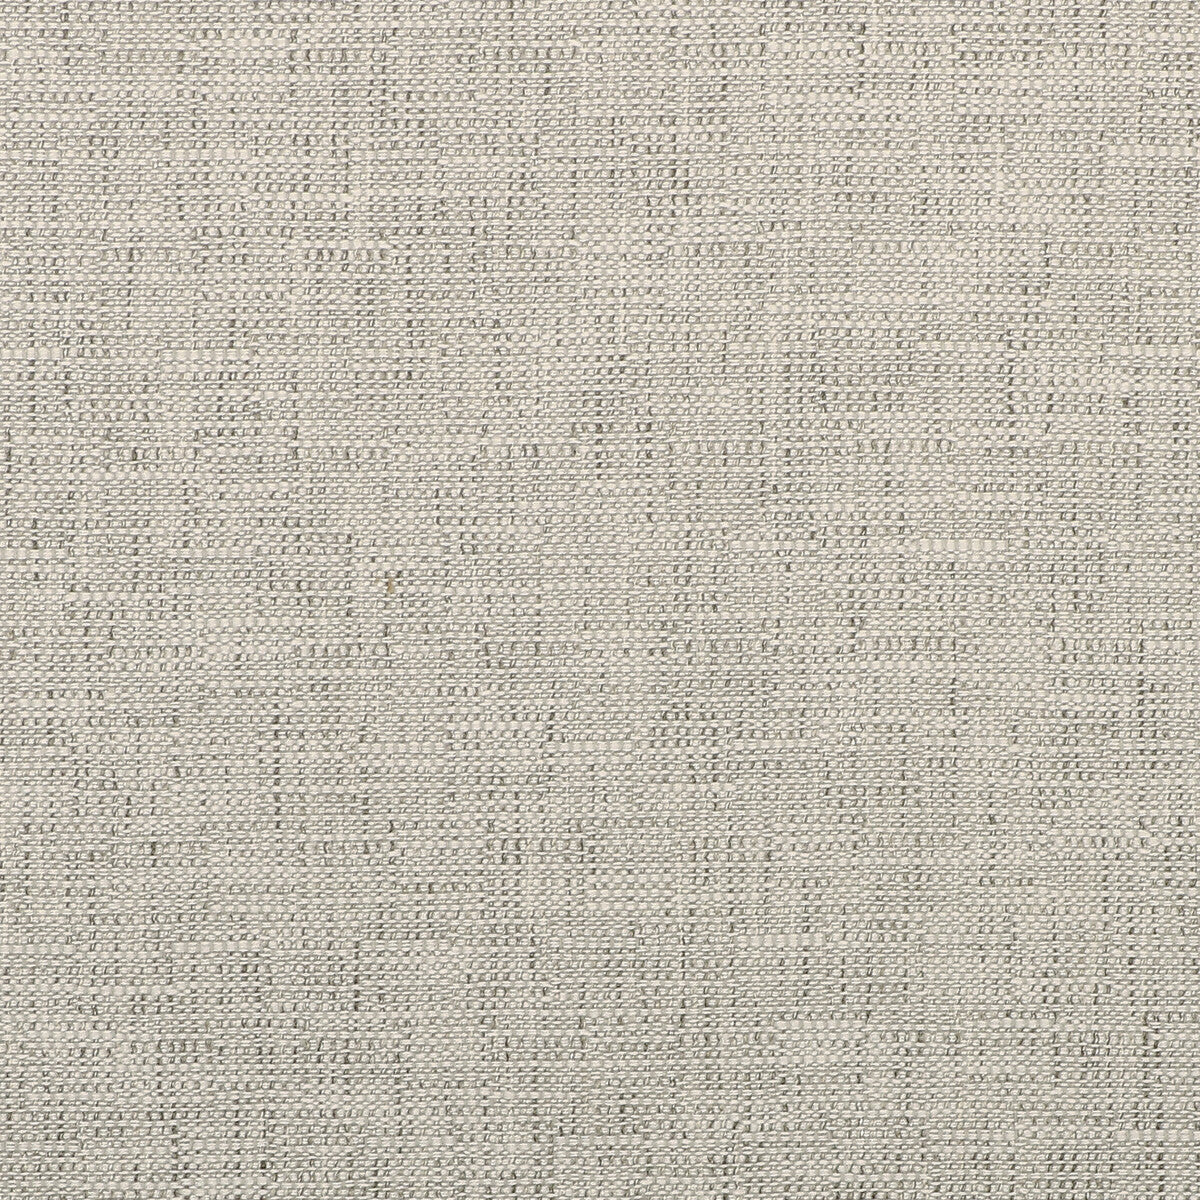 Kravet Smart fabric in 35518-111 color - pattern 35518.111.0 - by Kravet Smart in the Inside Out Performance Fabrics collection